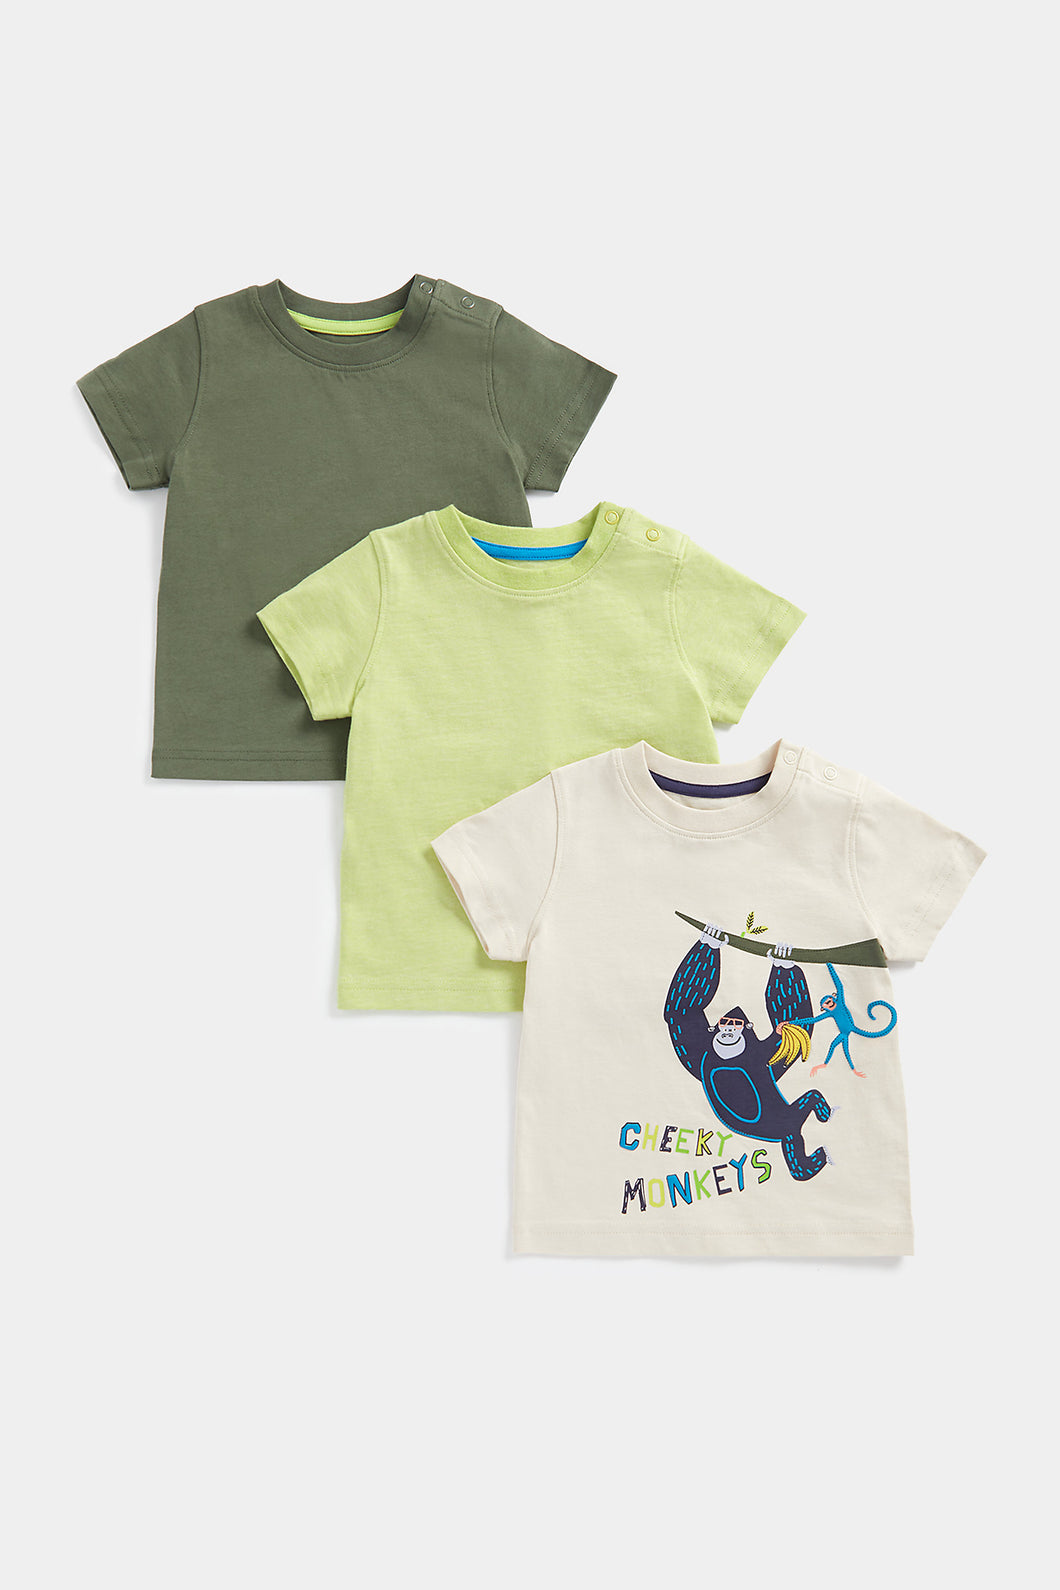 Mothercare Cheeky Monkey T-Shirts - 3 Pack